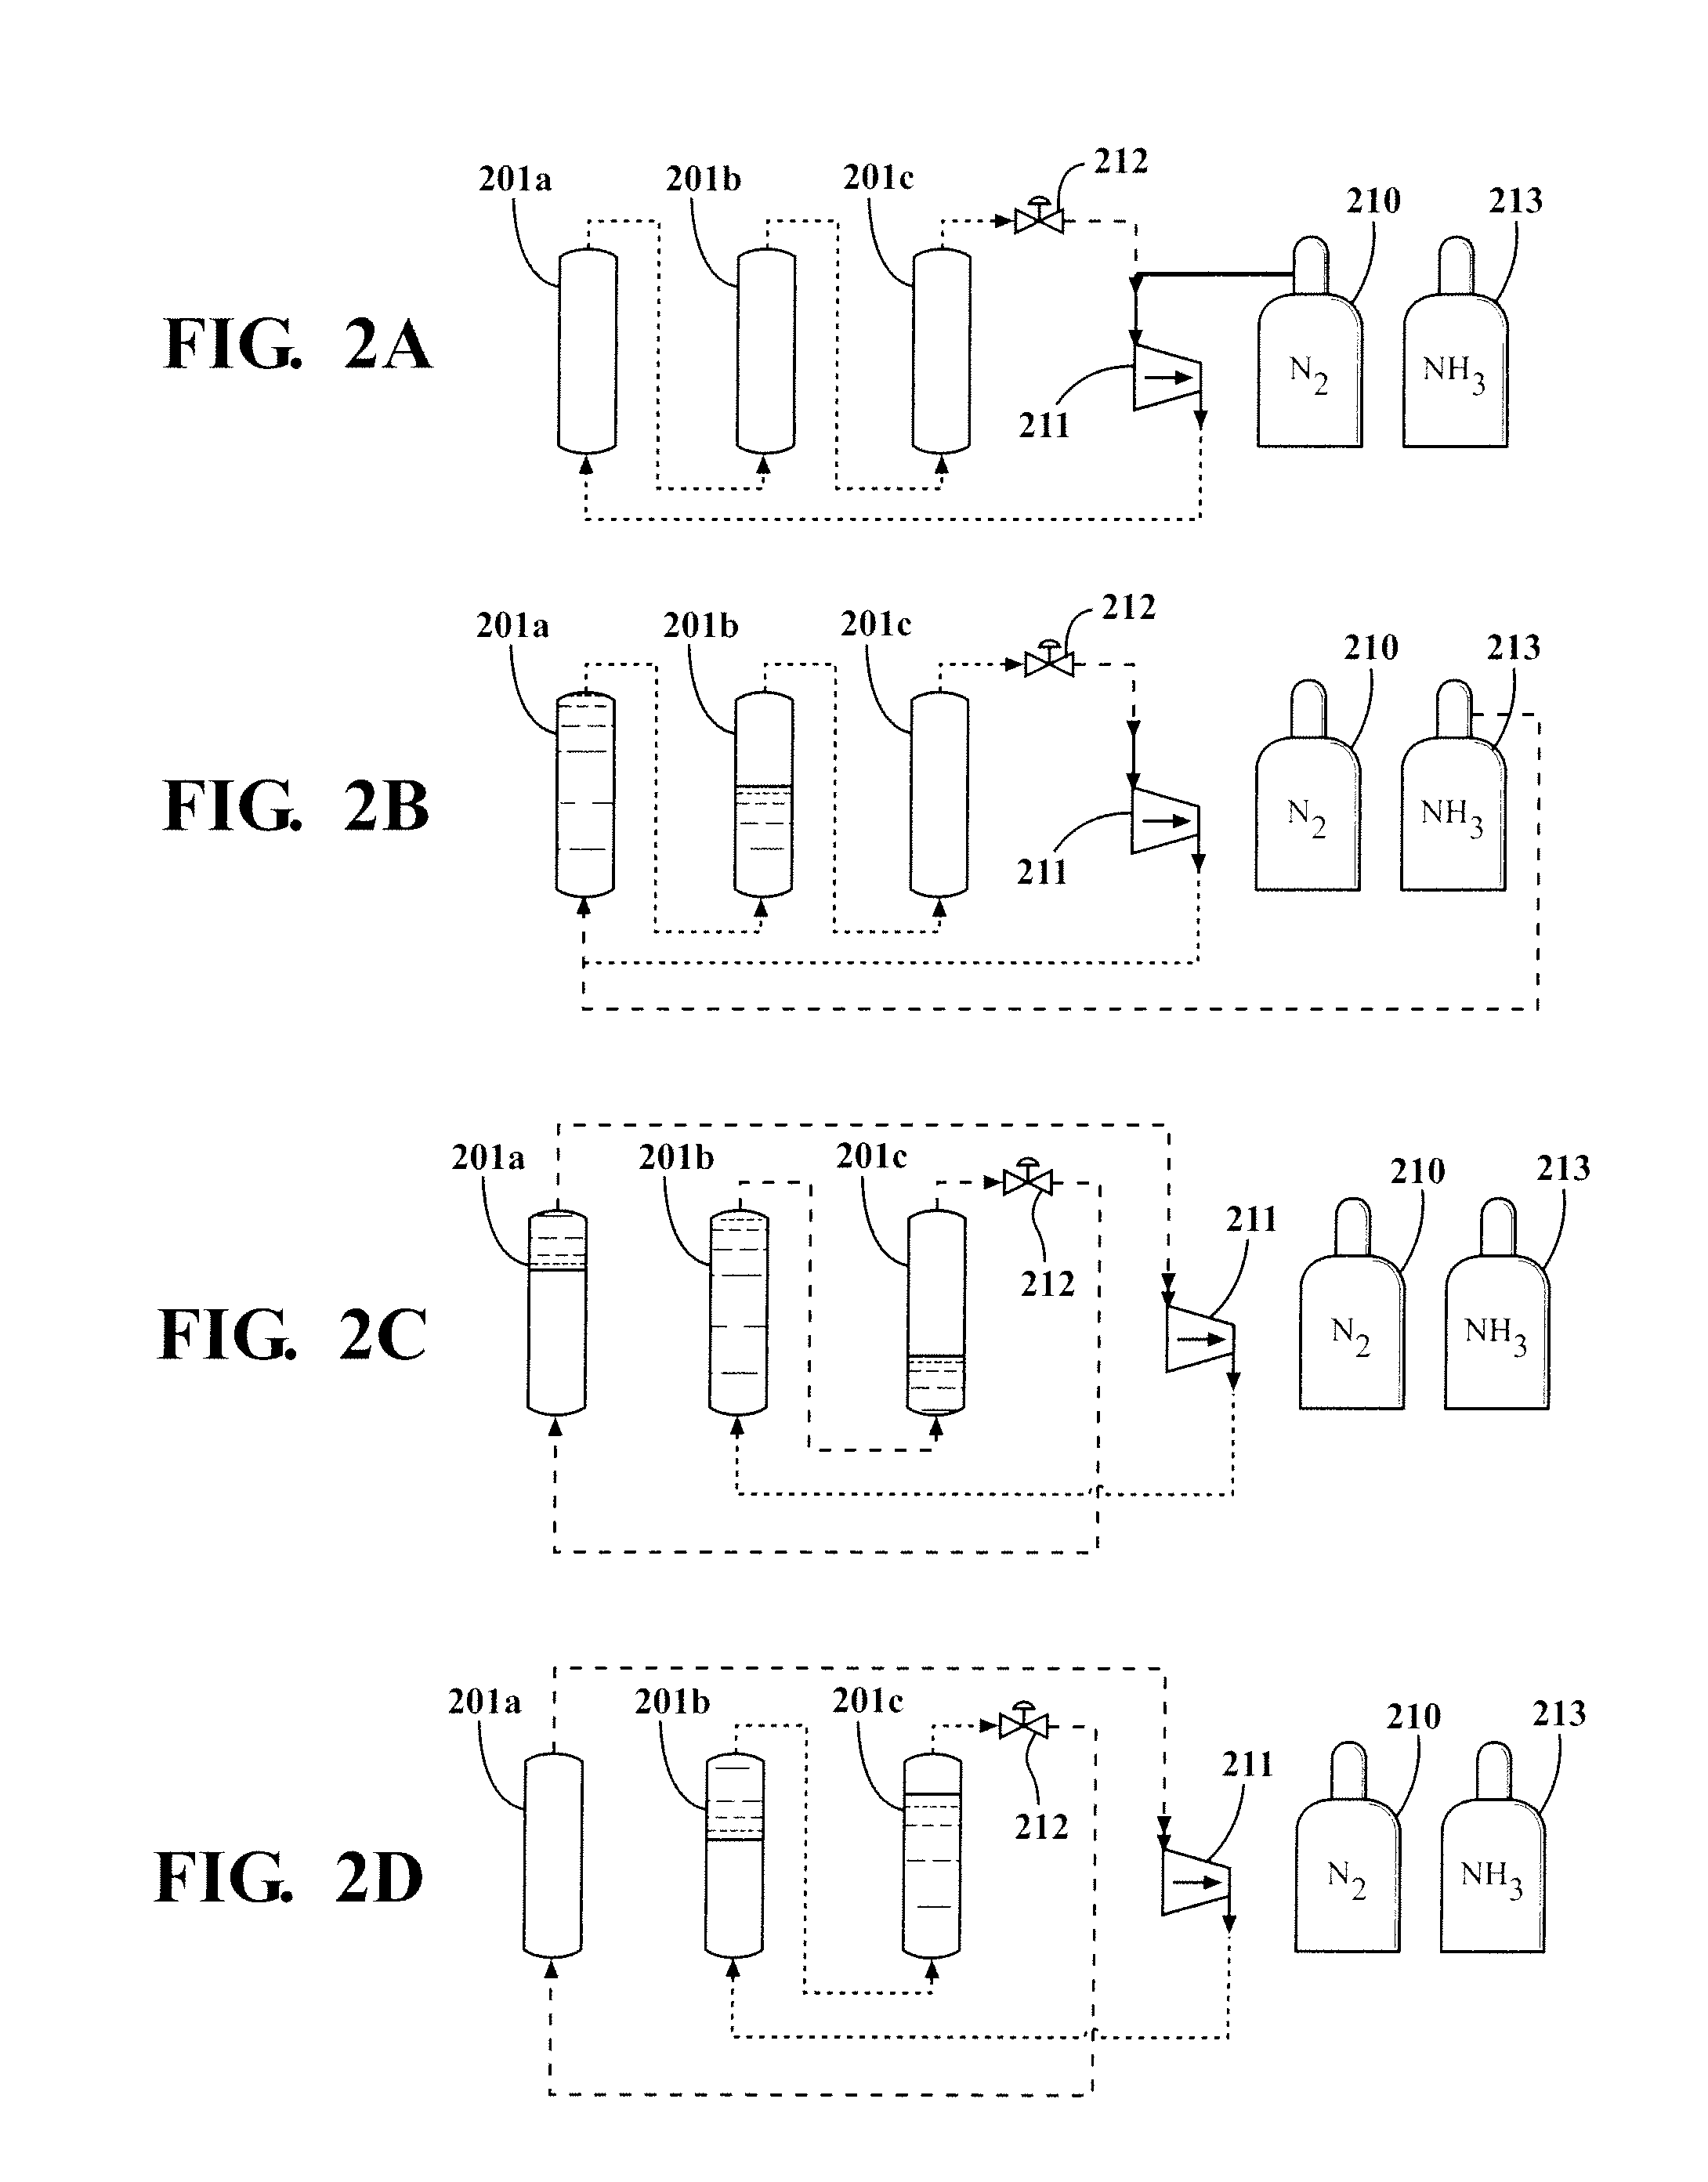 Method of separating components from a gas stream